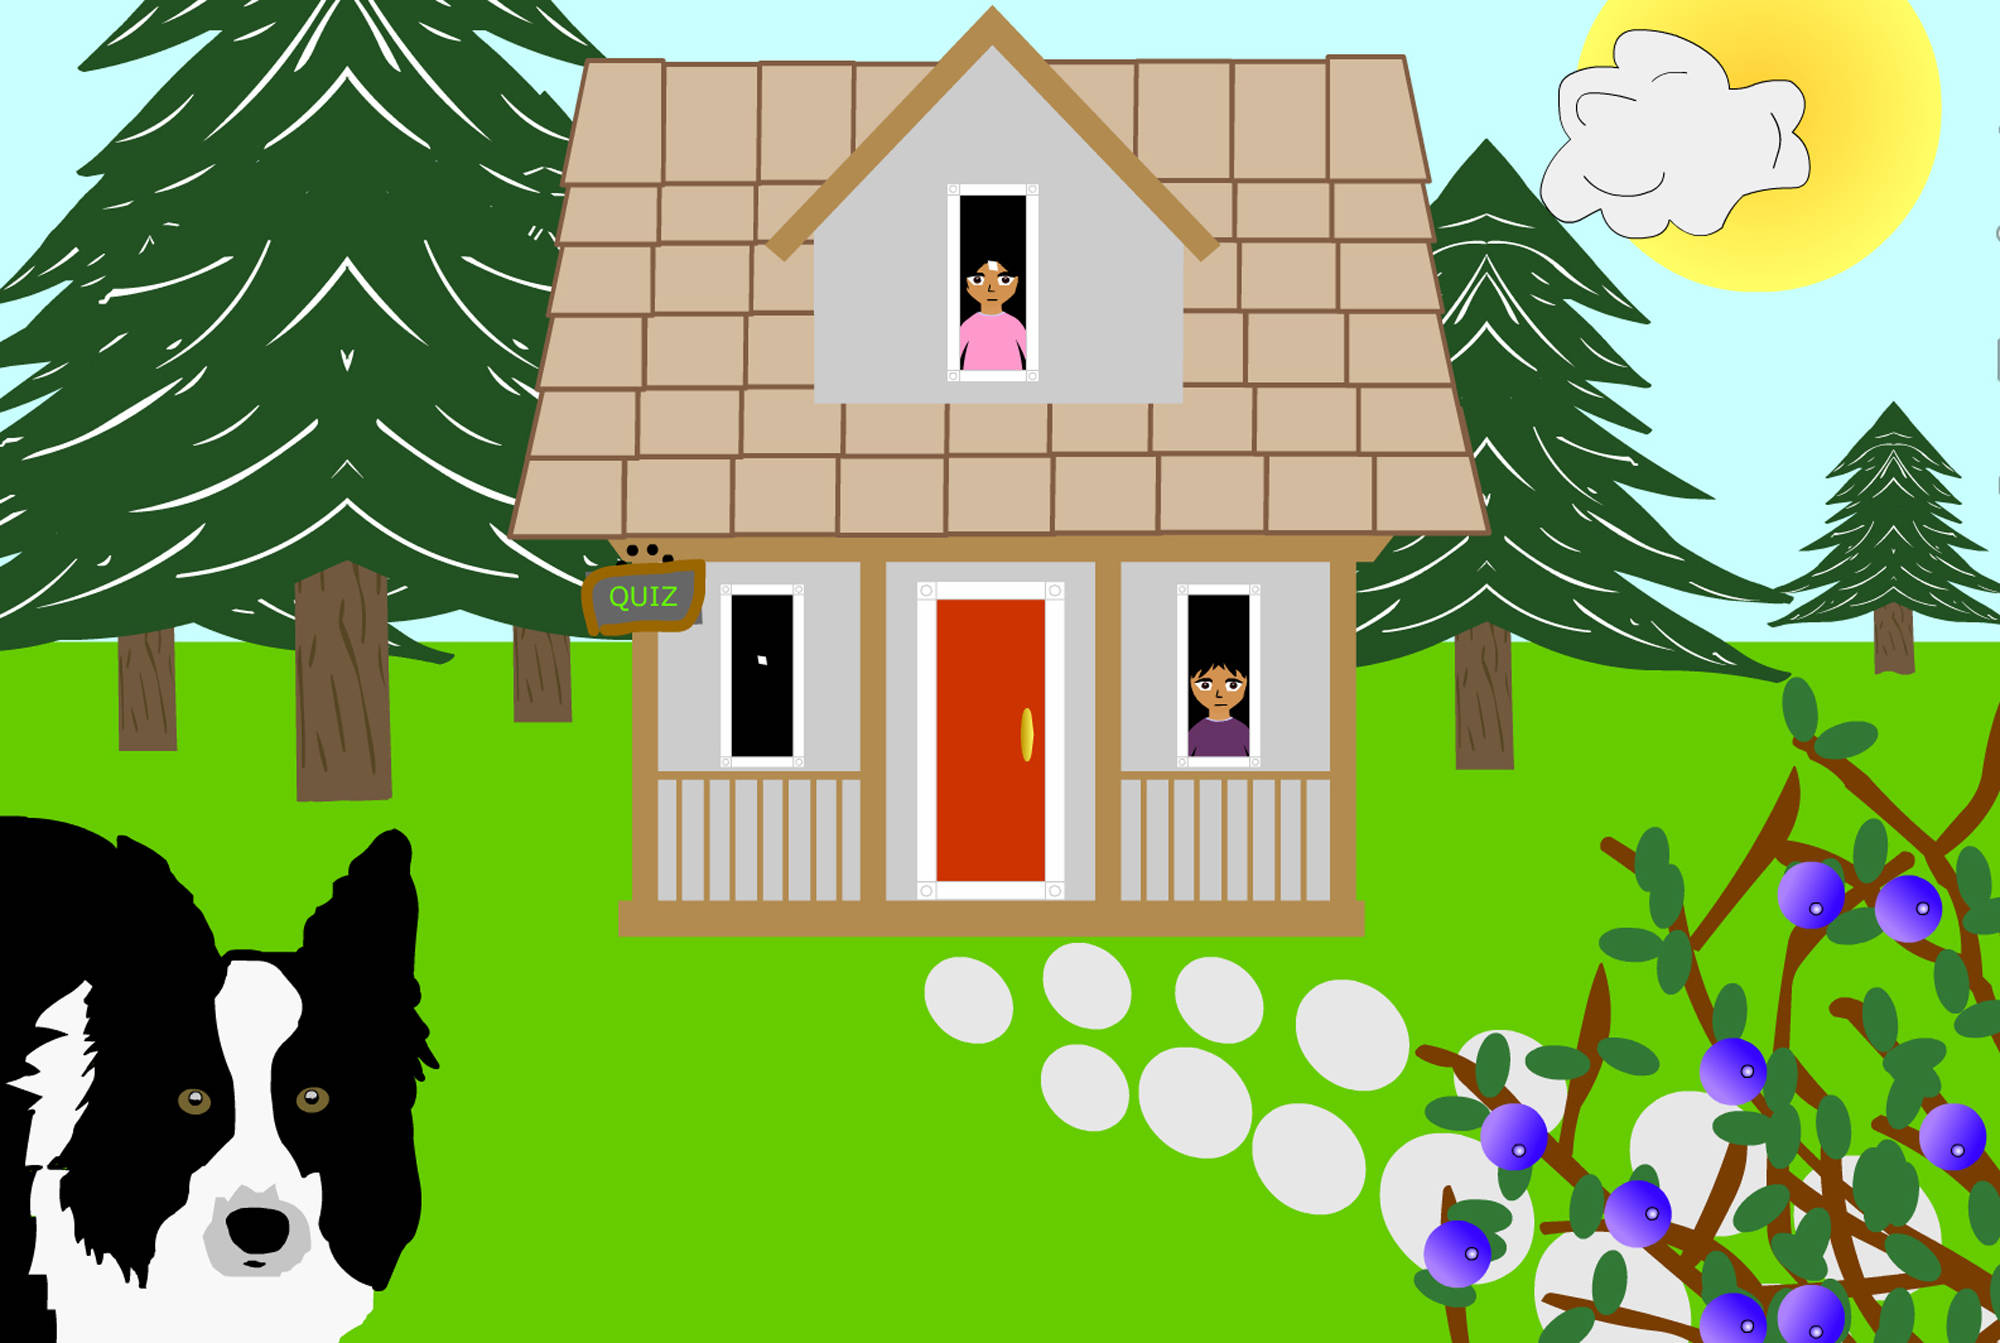 A new game on the “Learning Tlingit” app, entitled “Ax H&